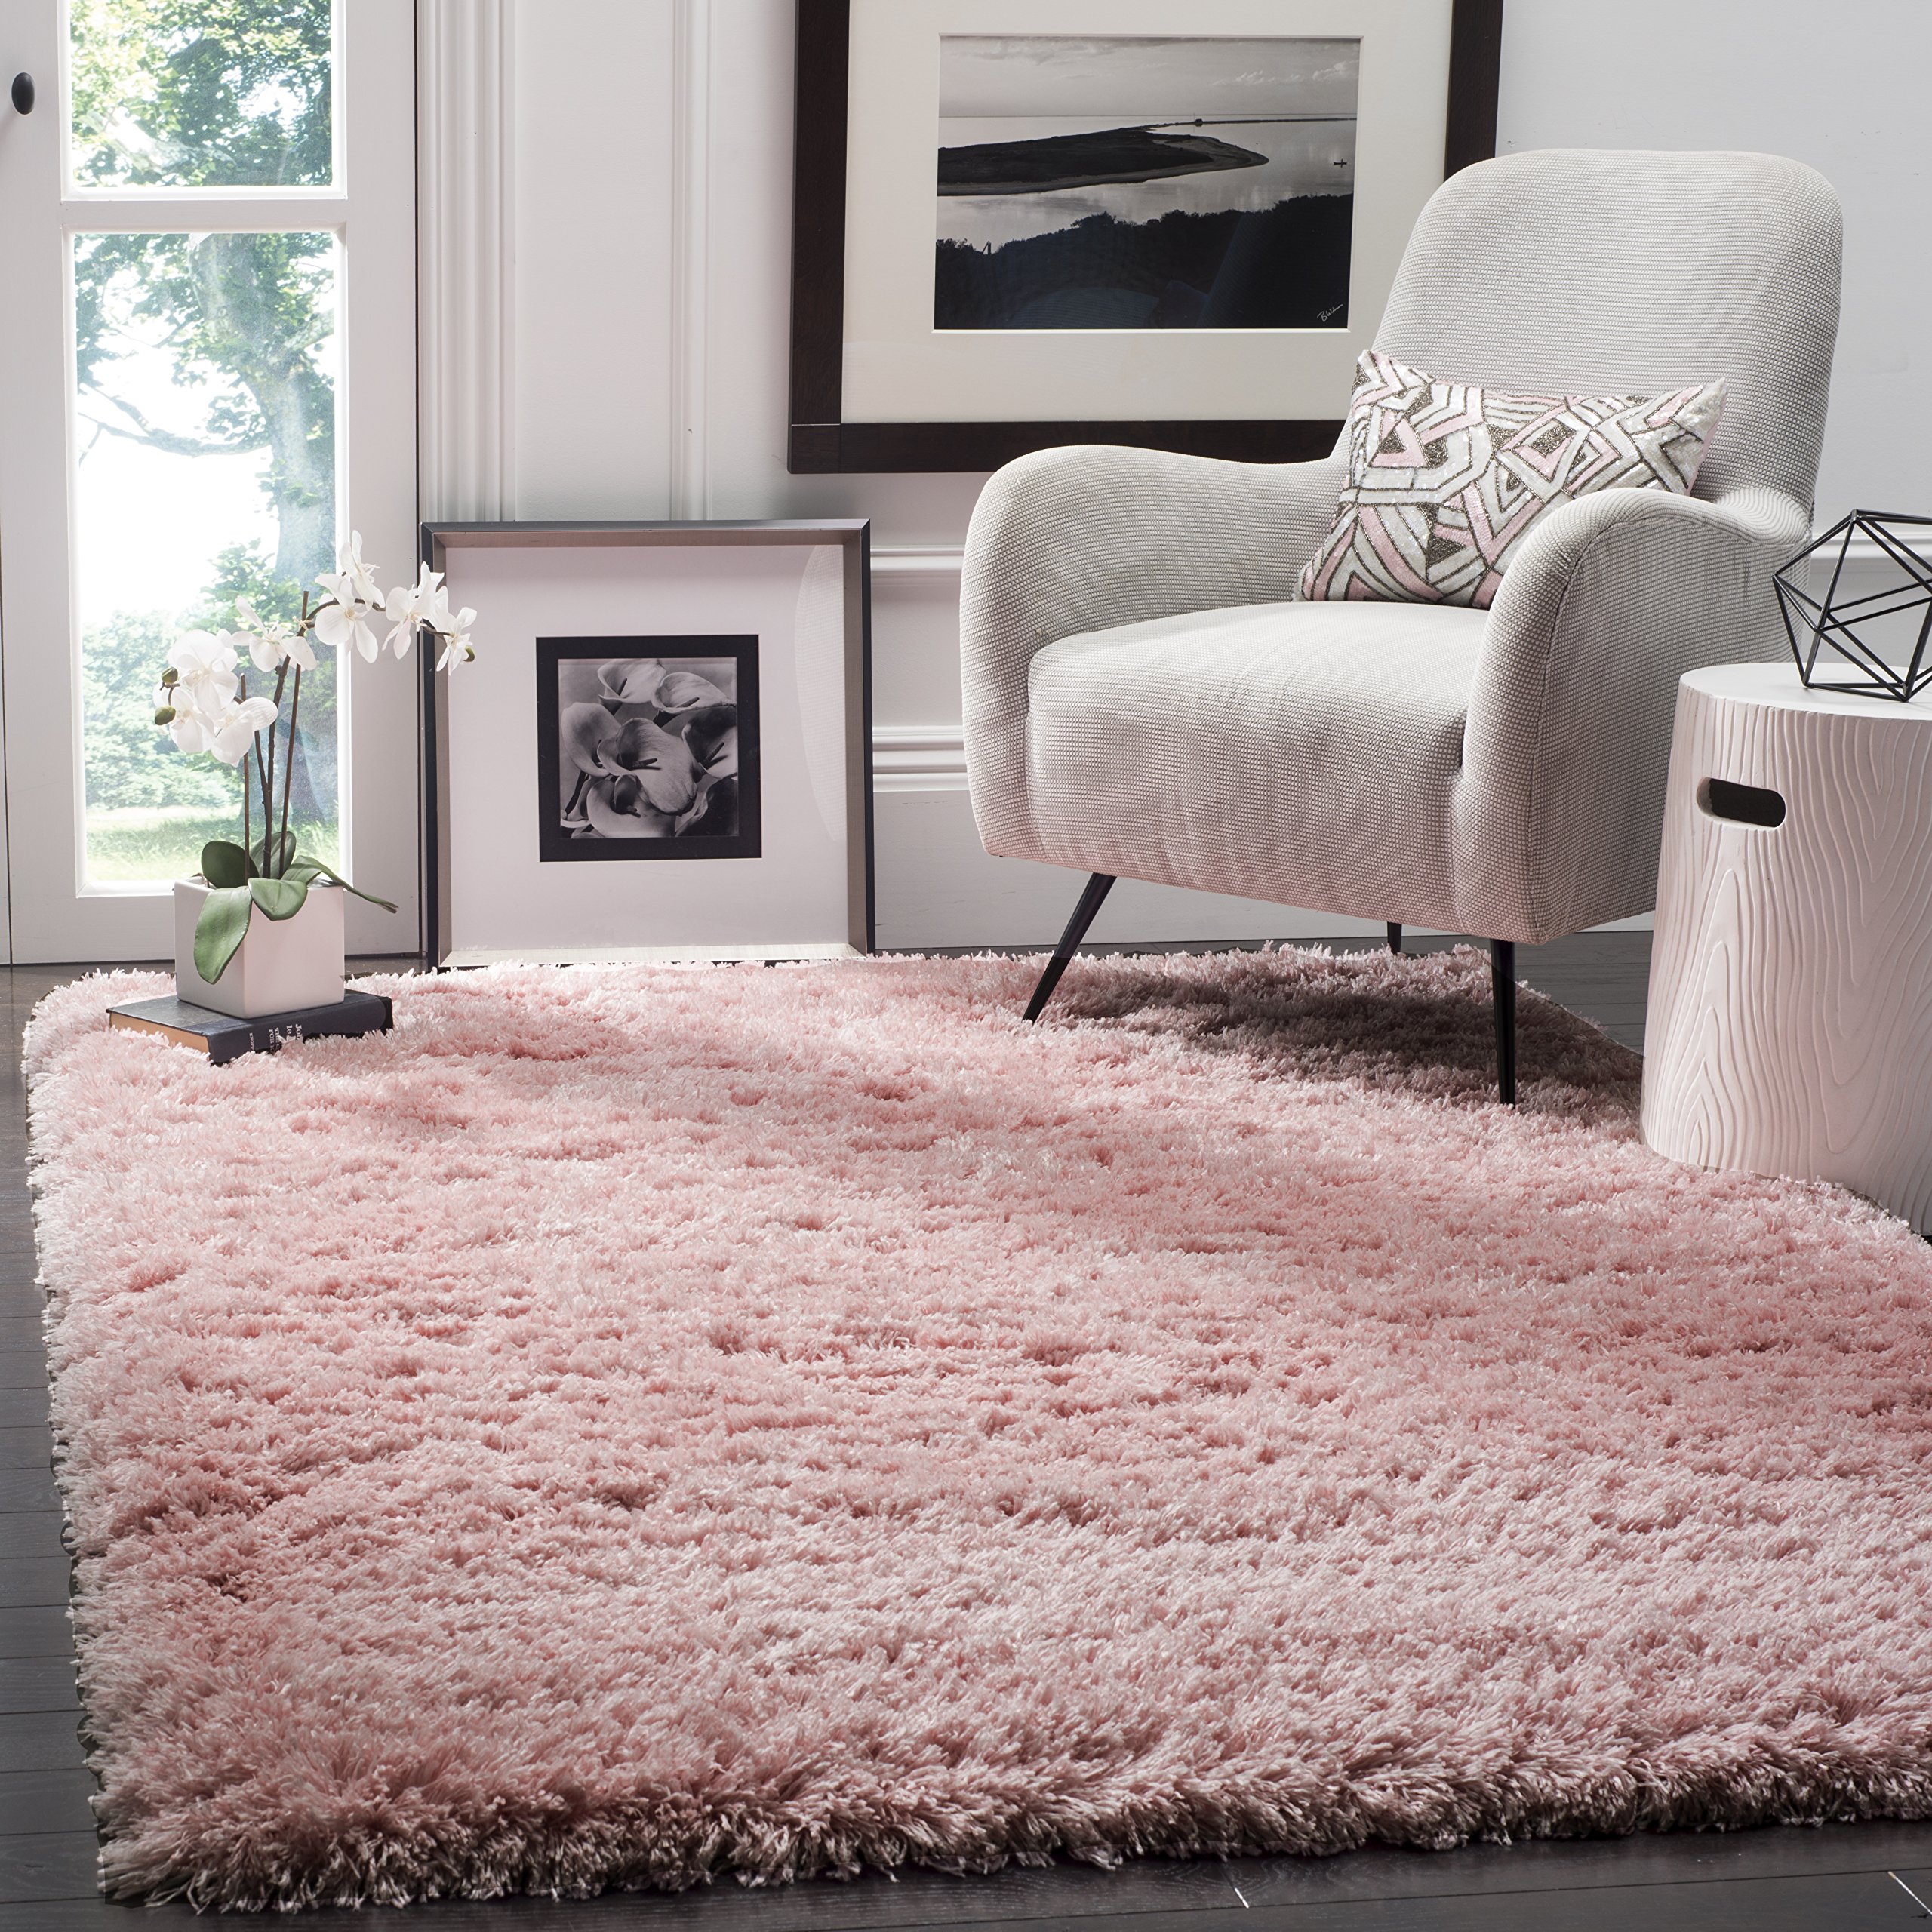 Safavieh Polar Shag Collection Accent Rug - 4' x 6', Light Pink, Solid Glam Design, Non-Shedding & Easy Care, 3-inch Thick Ideal for High Traffic Areas in Entryway, Living Room, Bedroom (PSG800P)